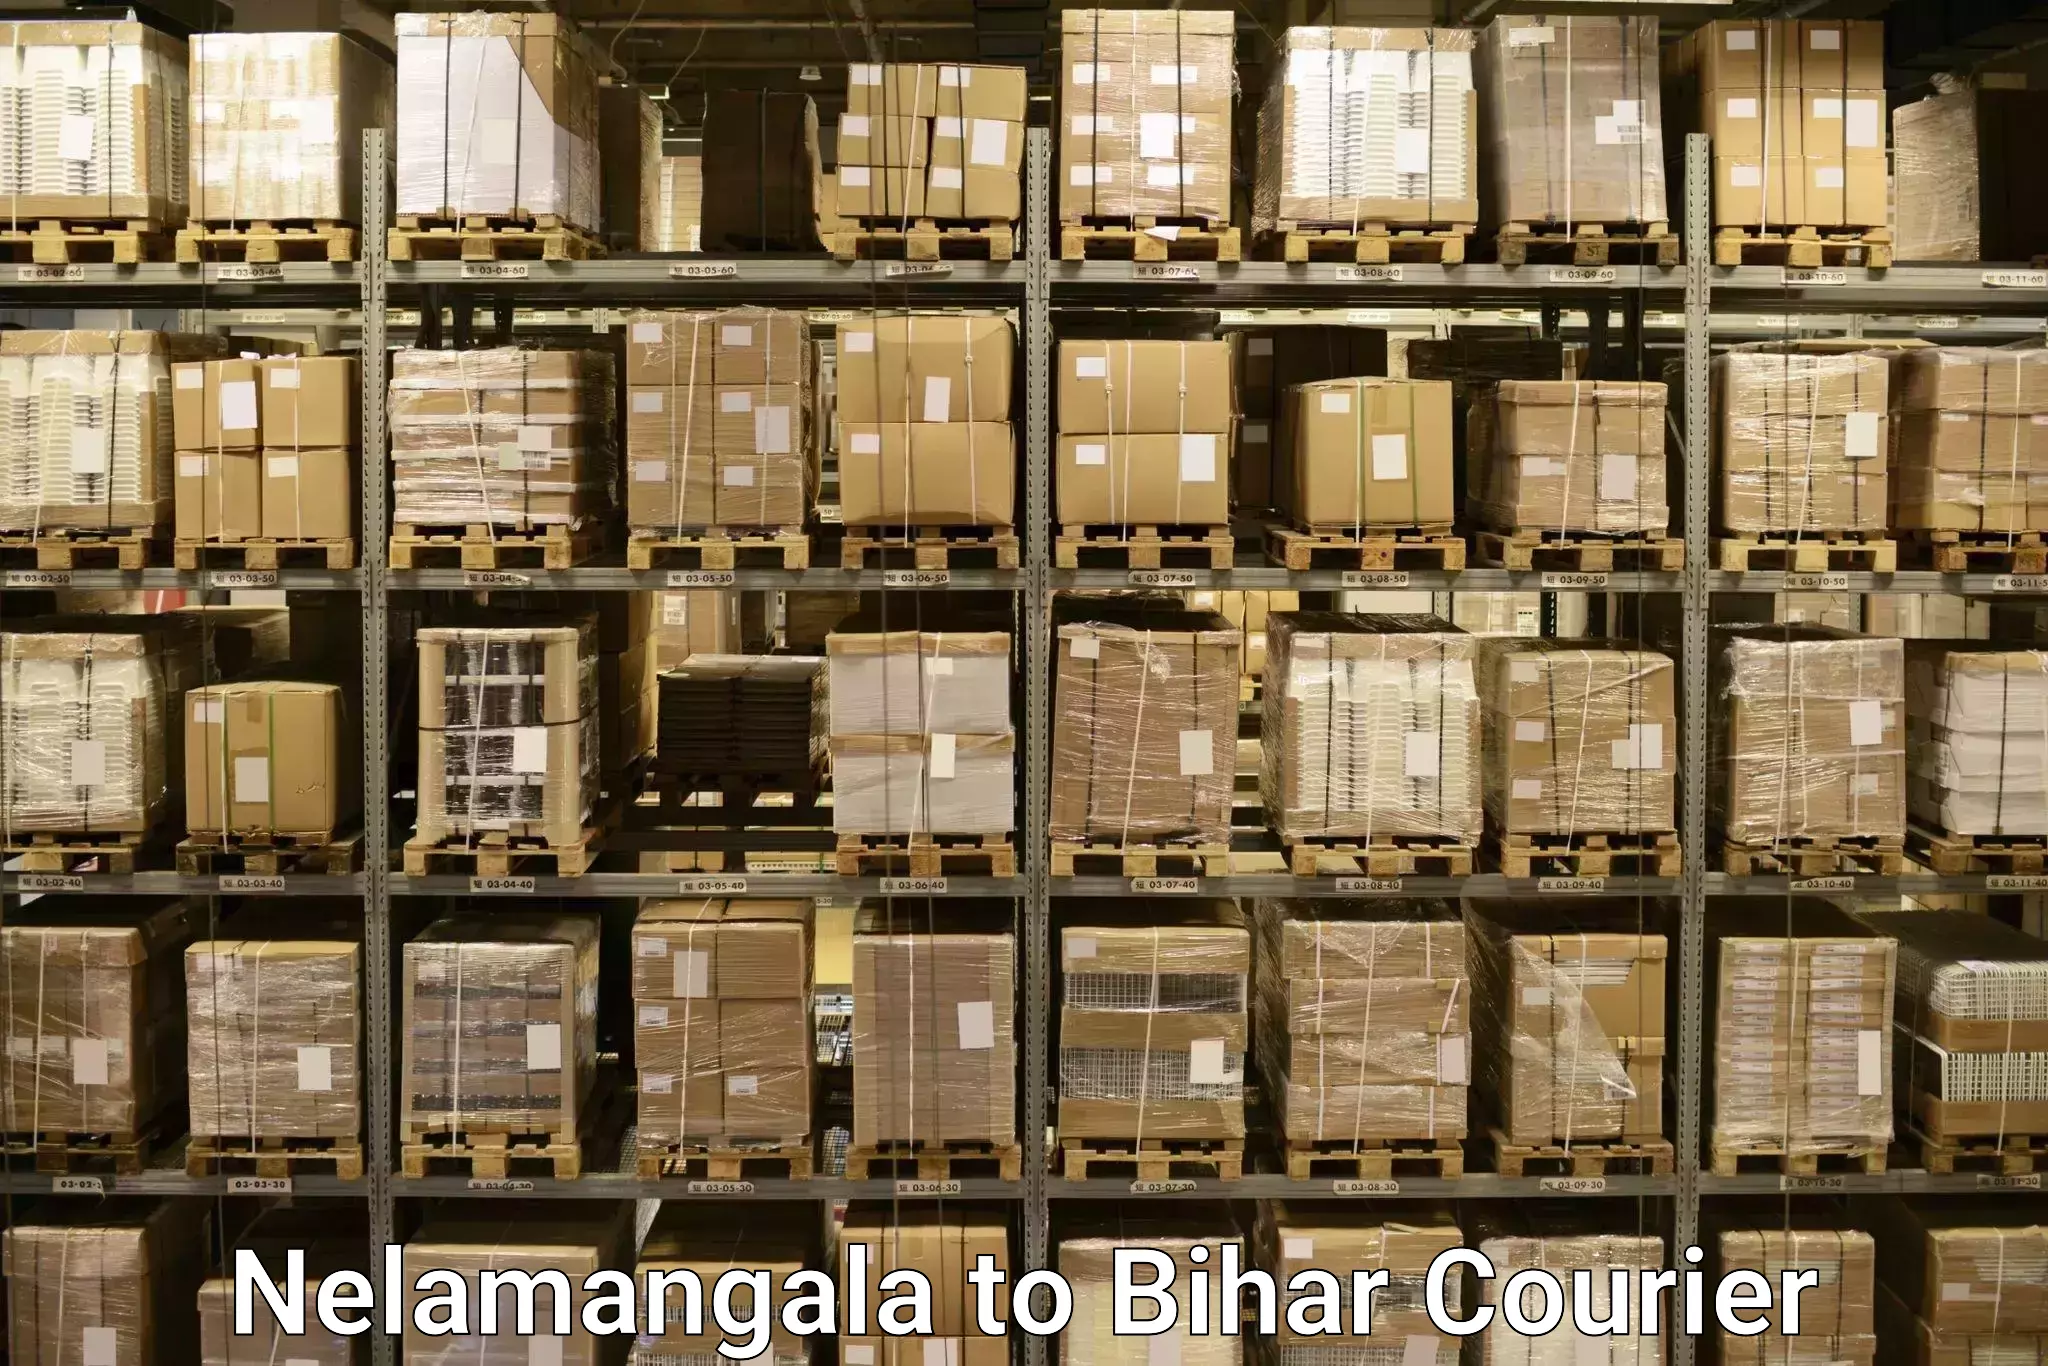 Baggage relocation service in Nelamangala to Biraul